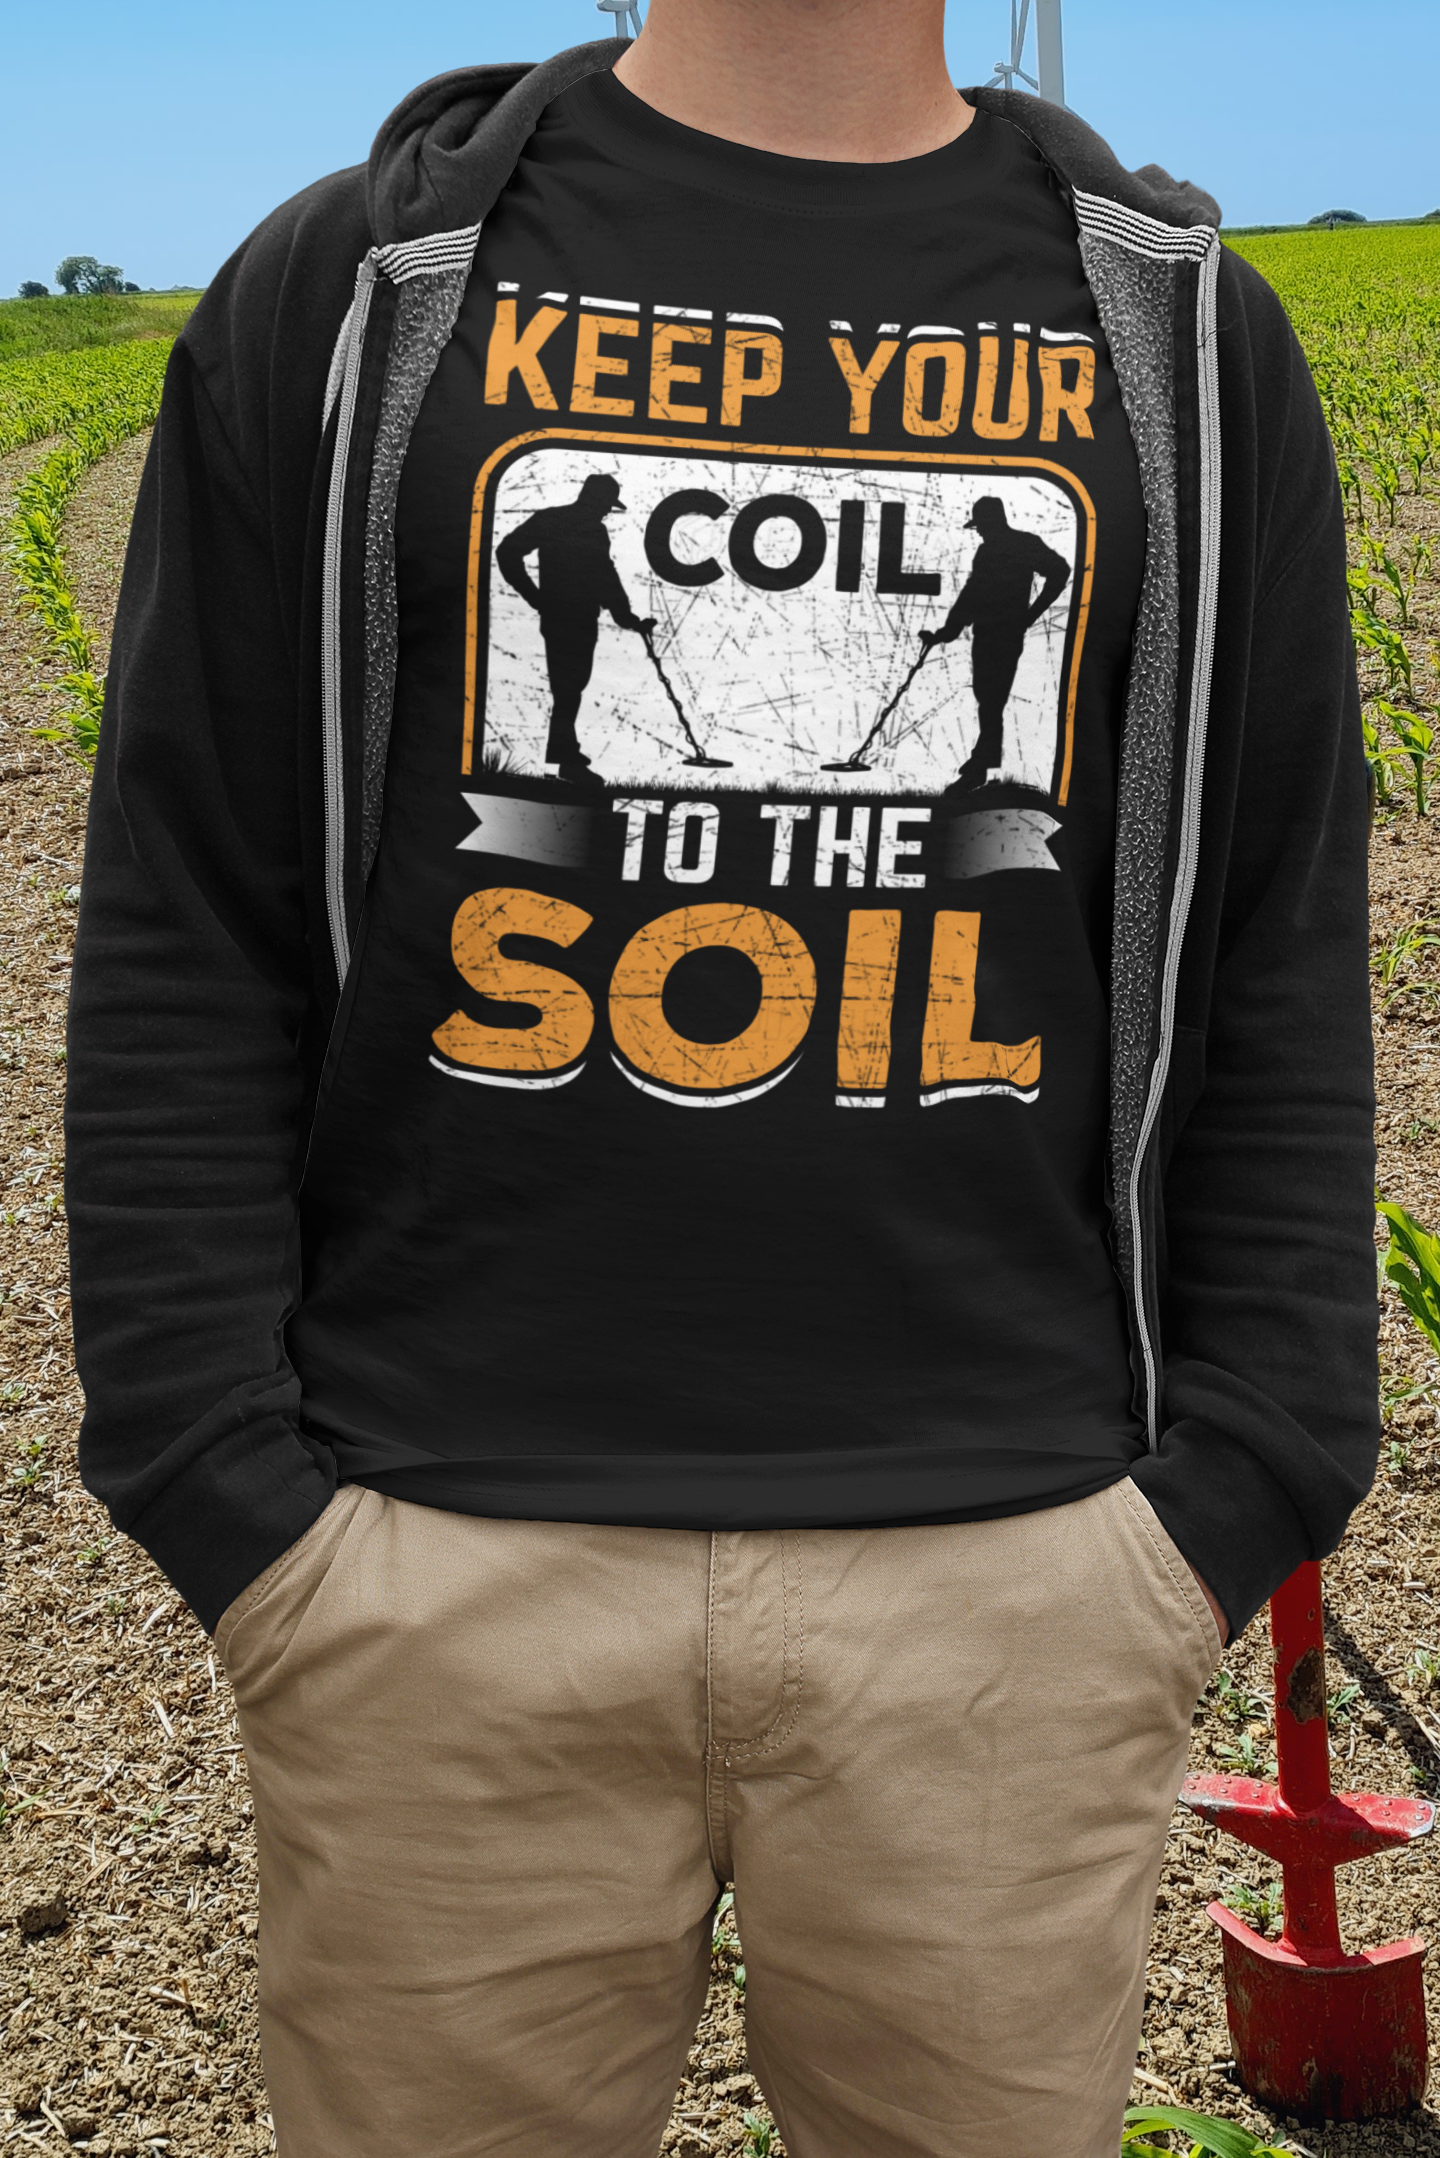 Keep your coil to the soil T-shirt